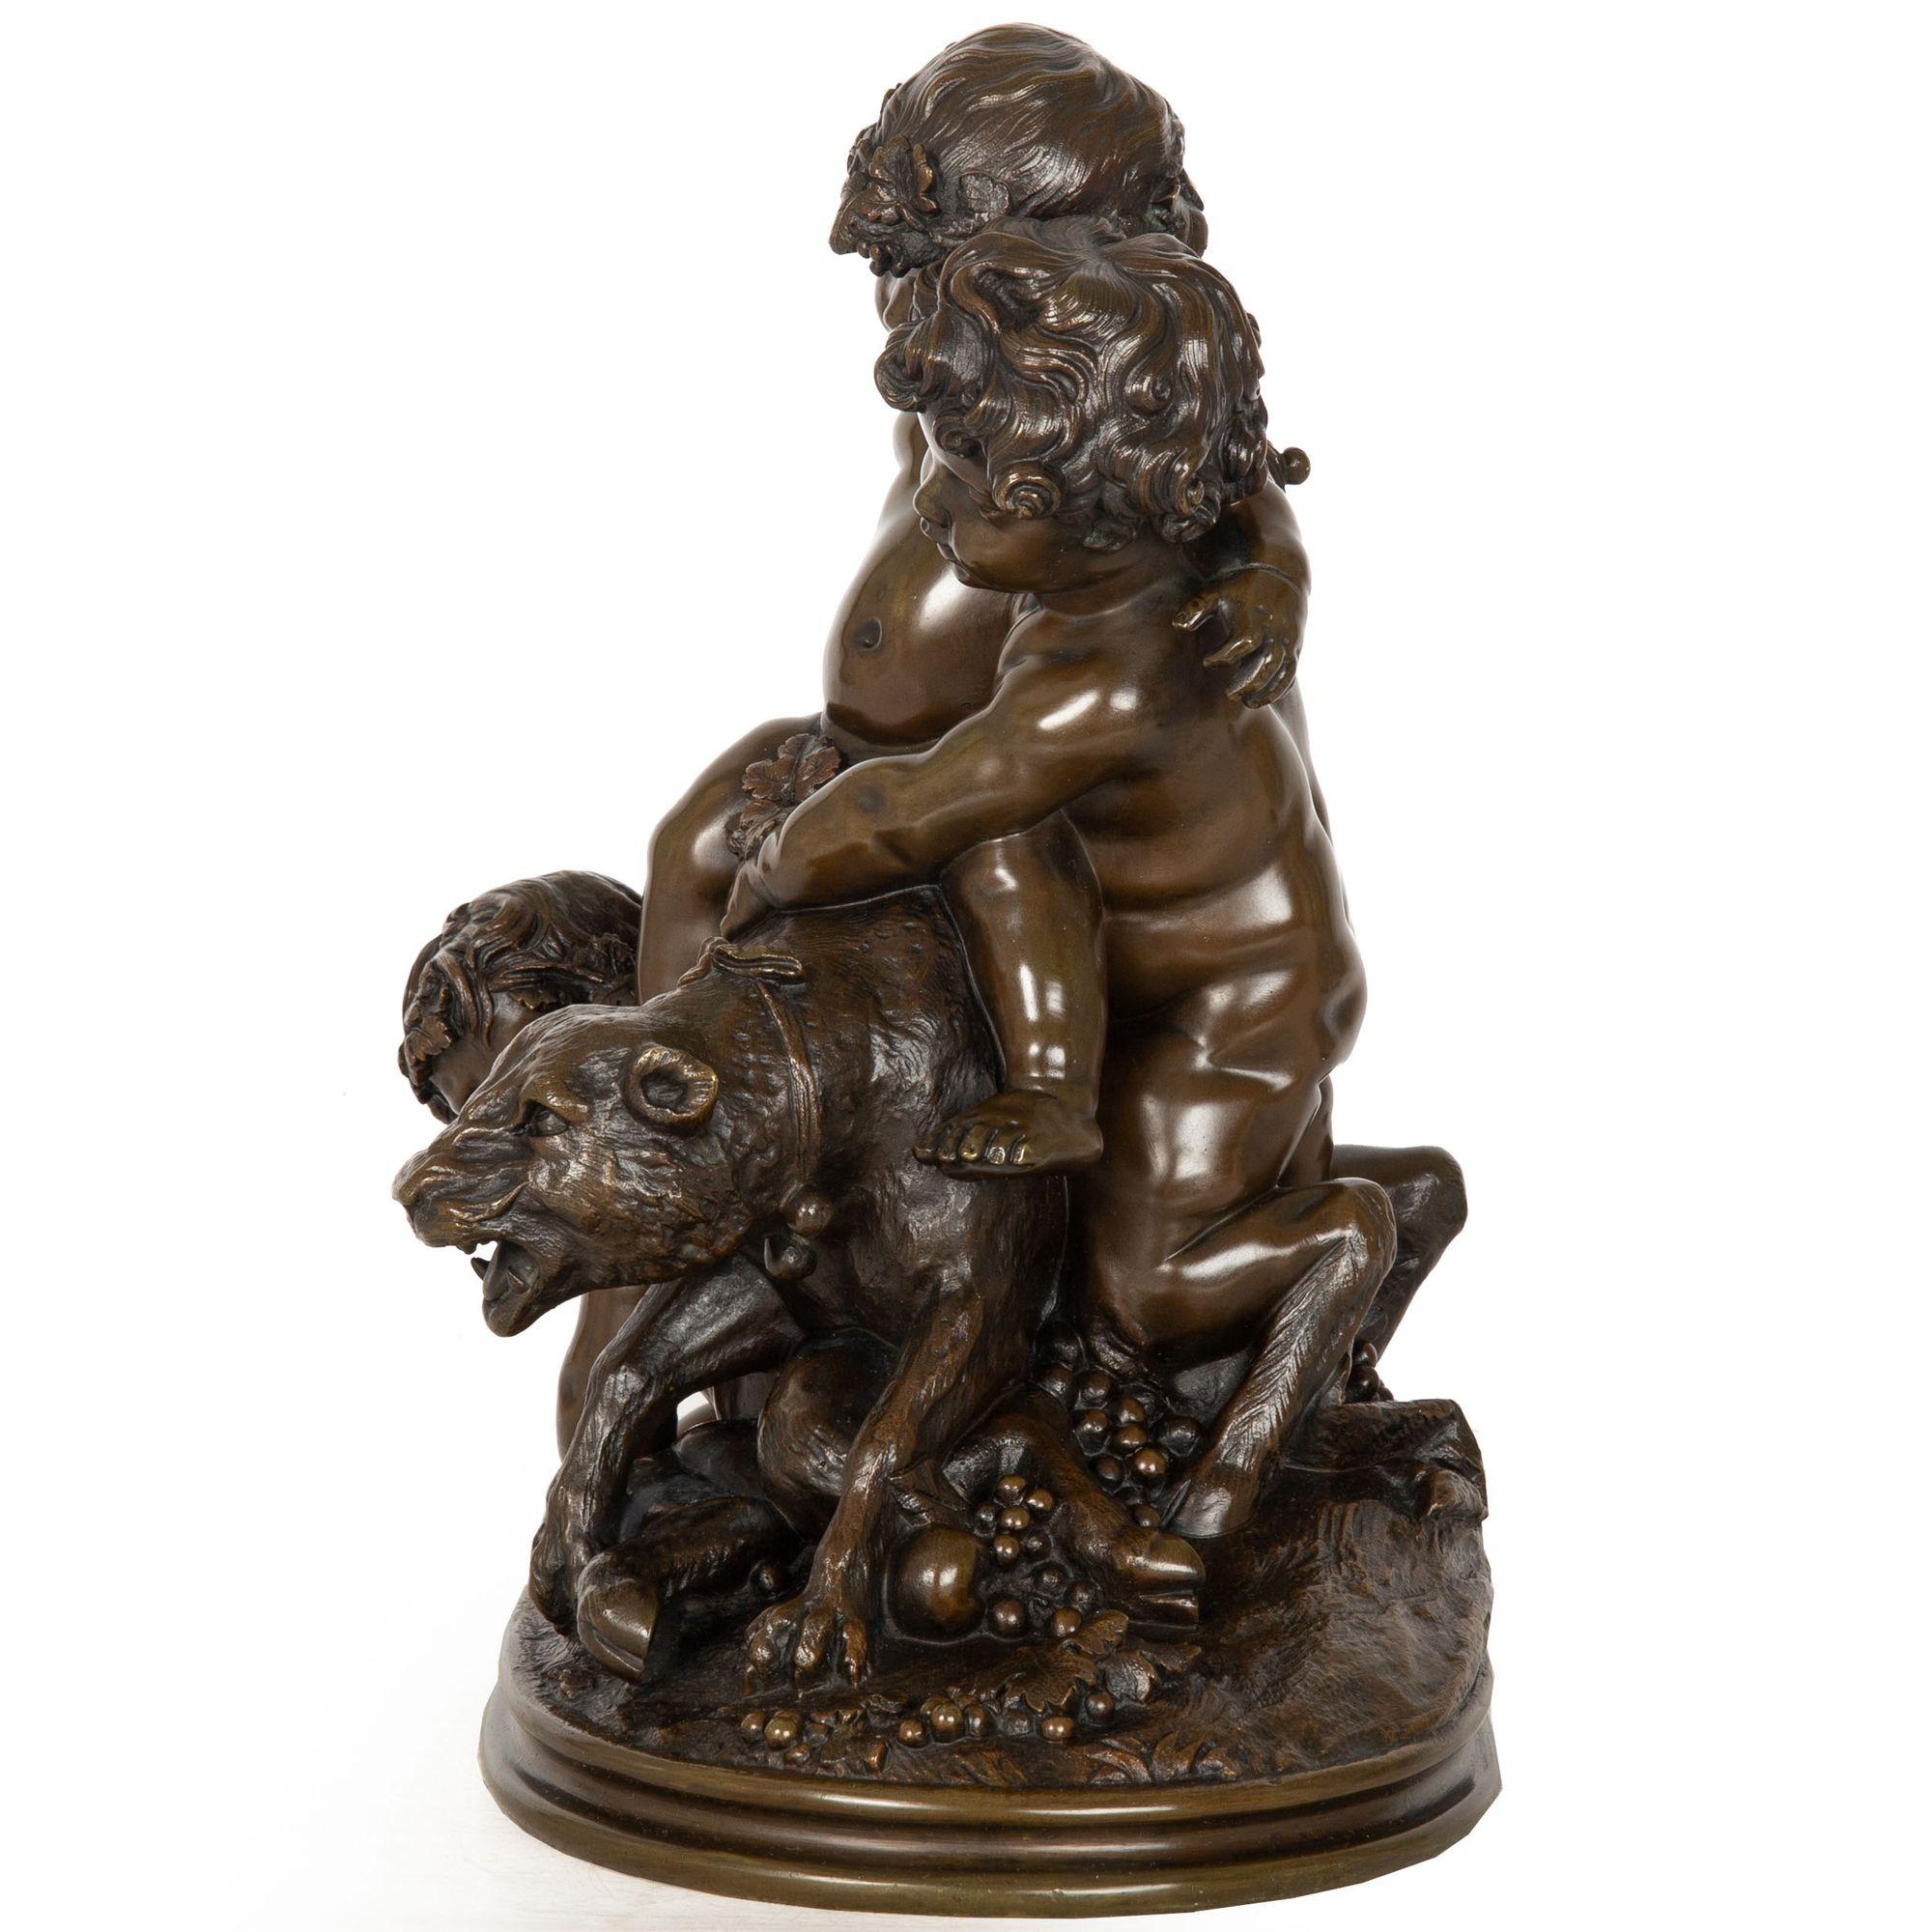 CLAUDE MICHEL, called CLODION [after]
French, 1738-1814

A Bacchanalia Group of Putto with a Wildcat

Sand-cast patinated bronze  signed in base 